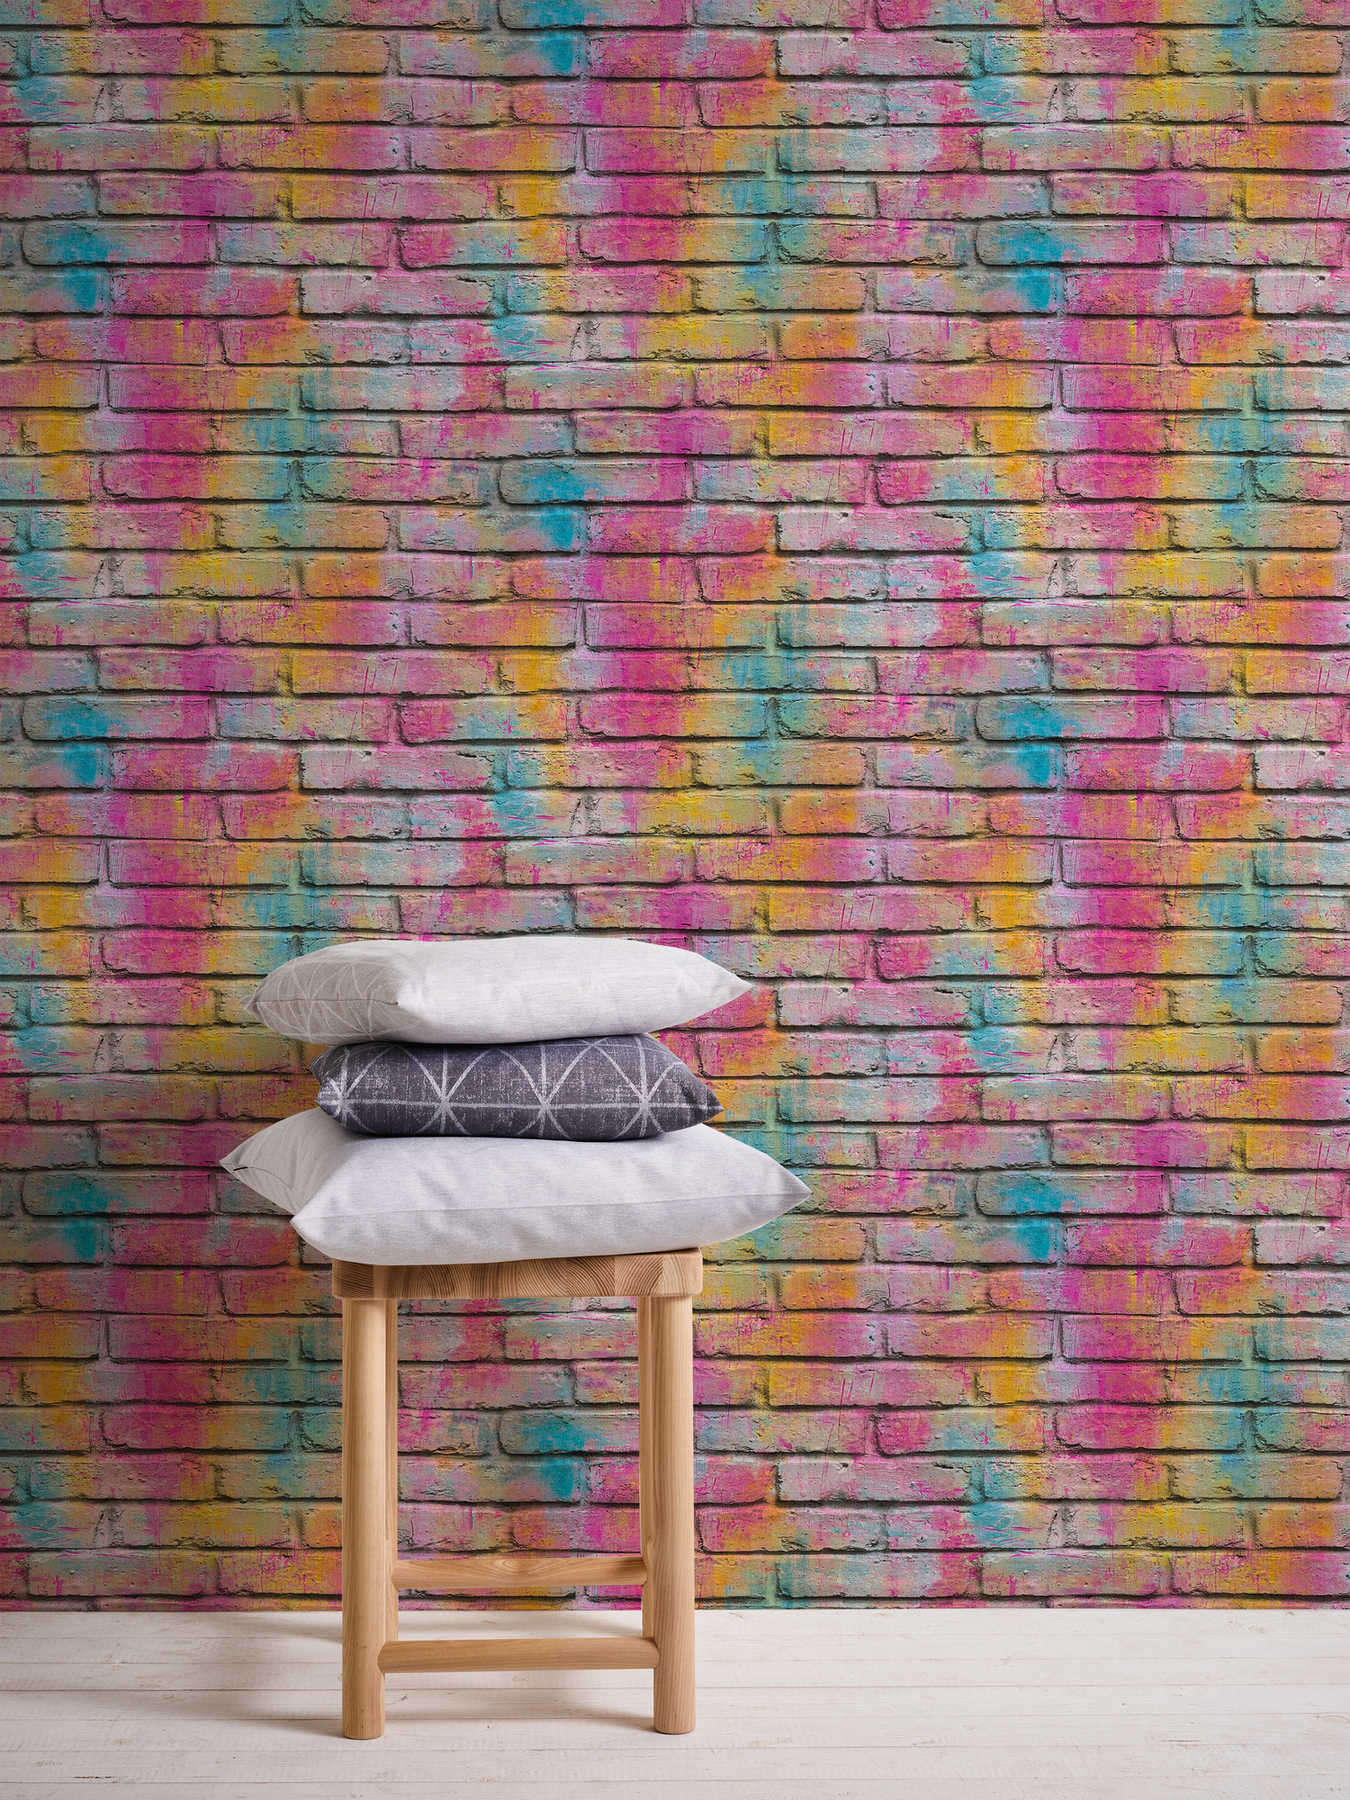             Brick wallpaper, masonry look with structure embossing - colourful, purple
        